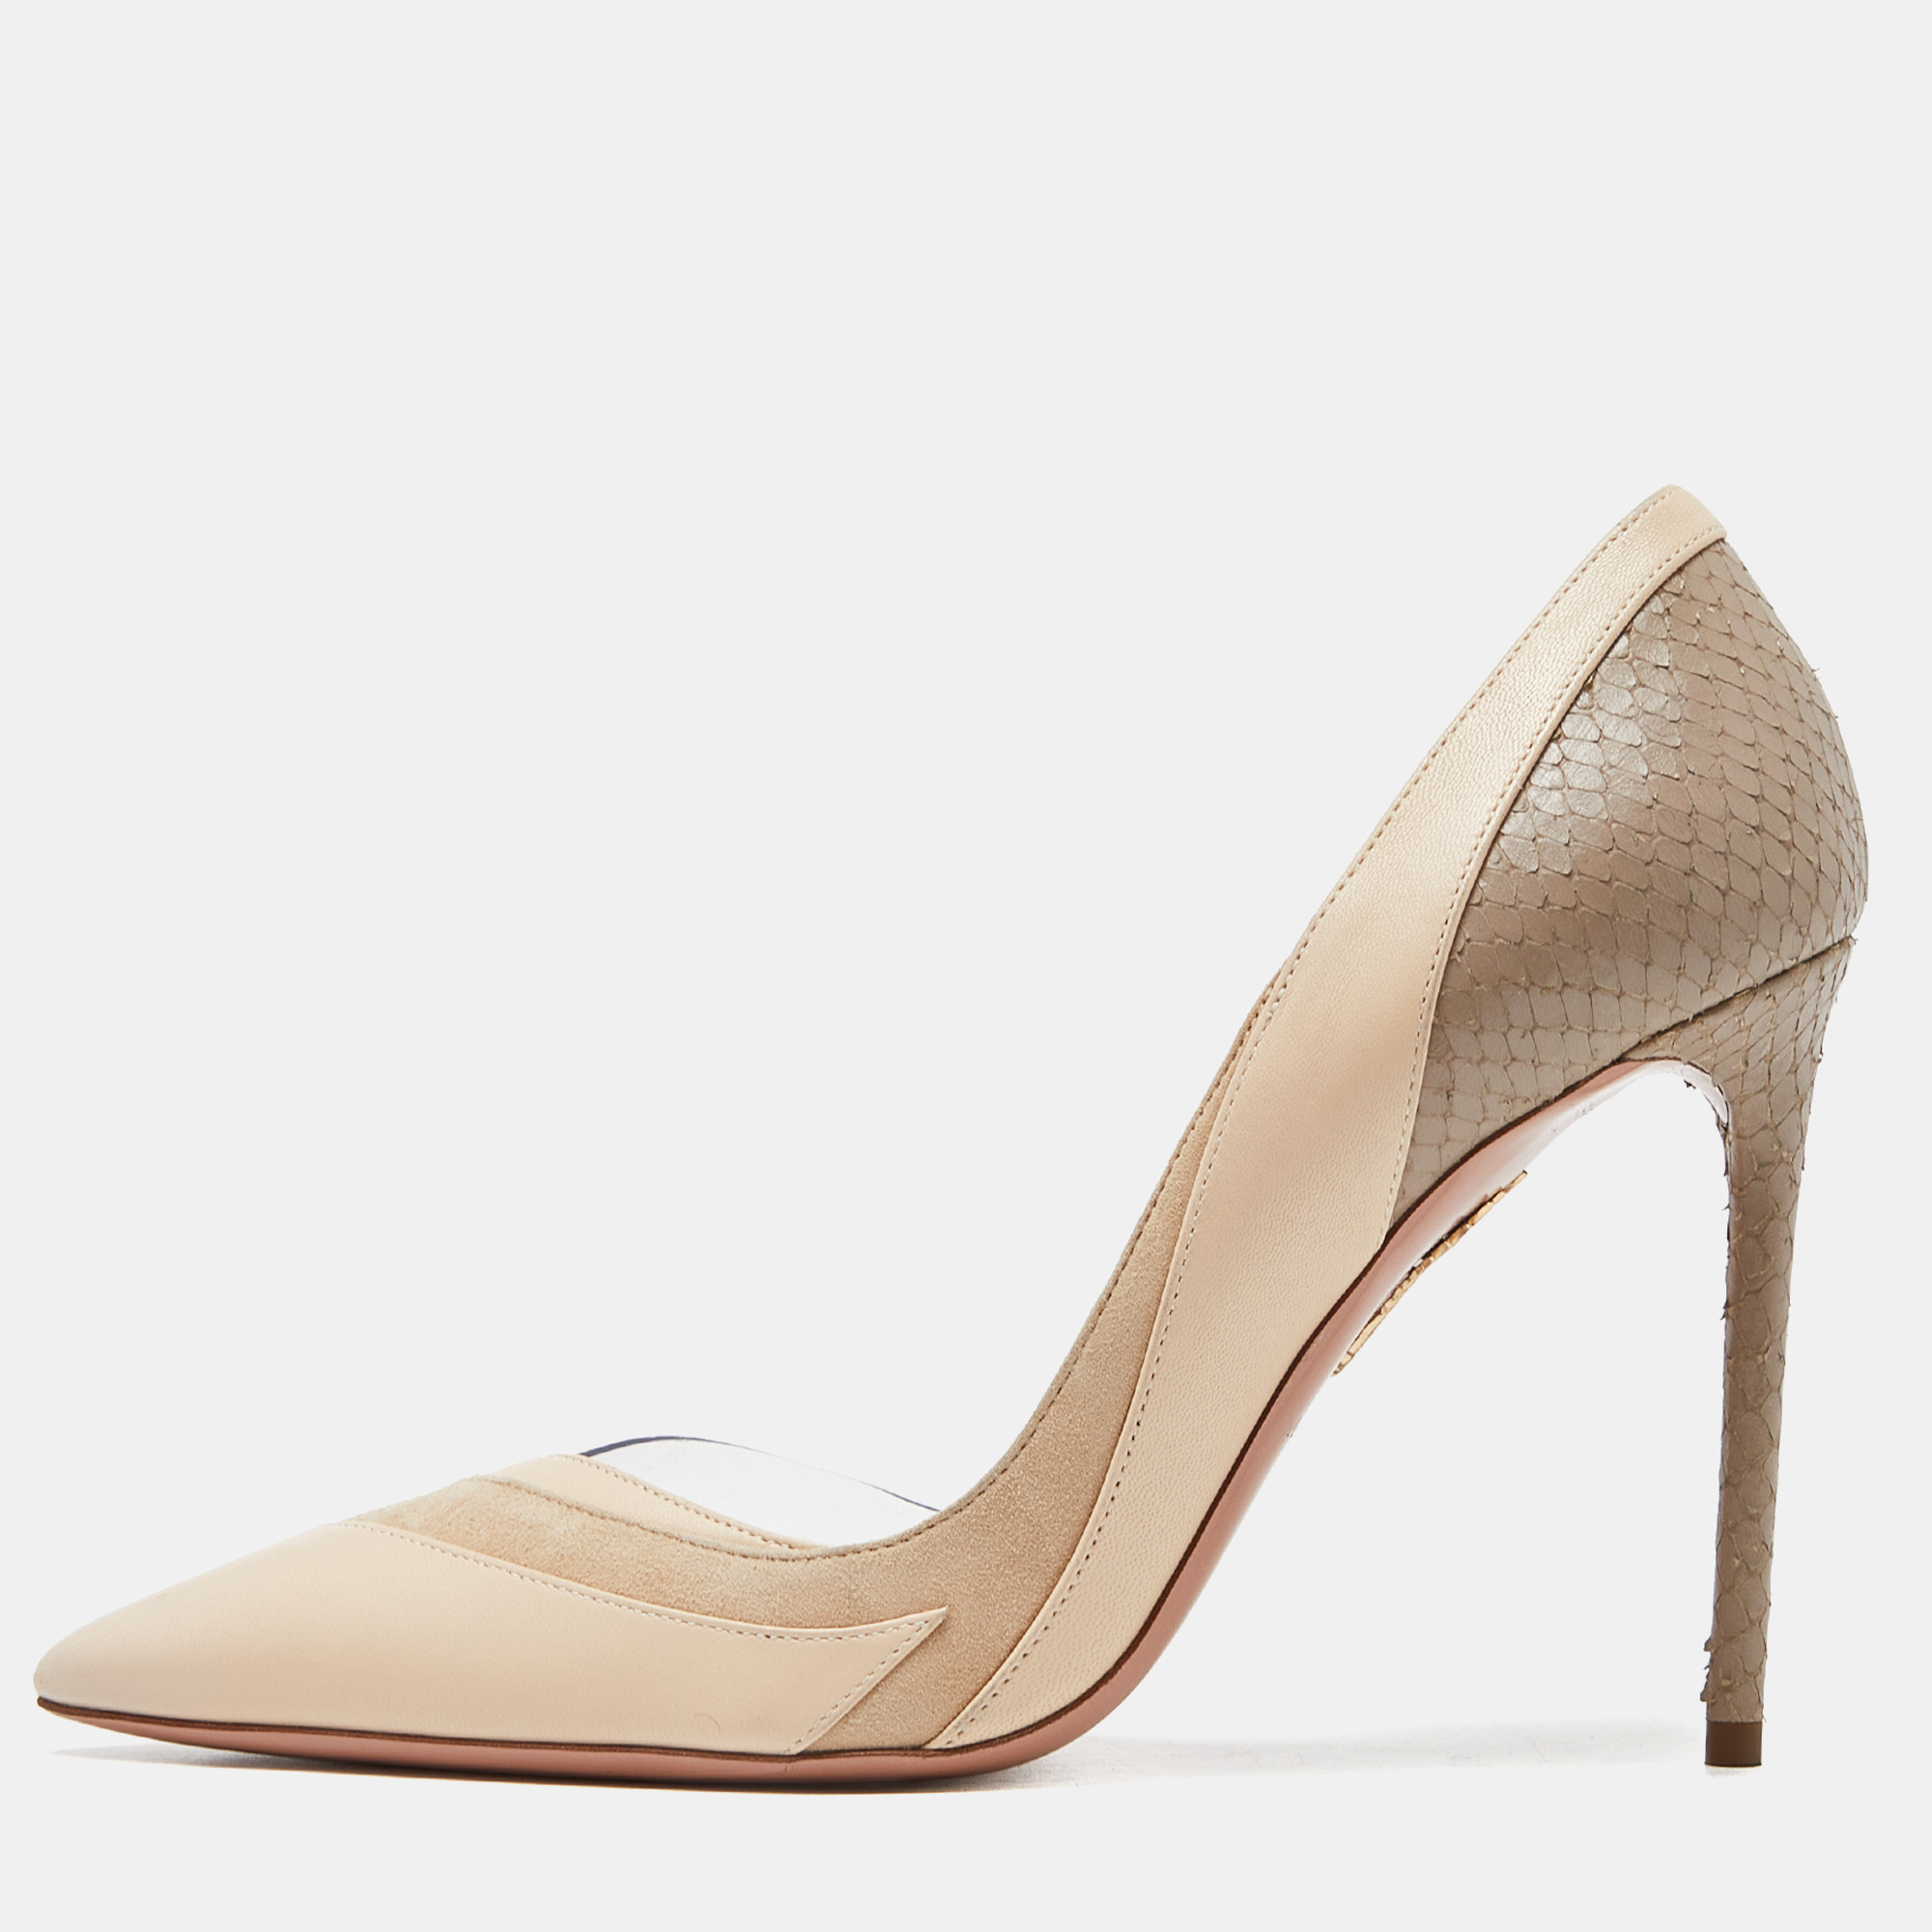 Aquazzura beige suede,leather,embossed snakeskin and pvc pointed toe pumps size 37.5